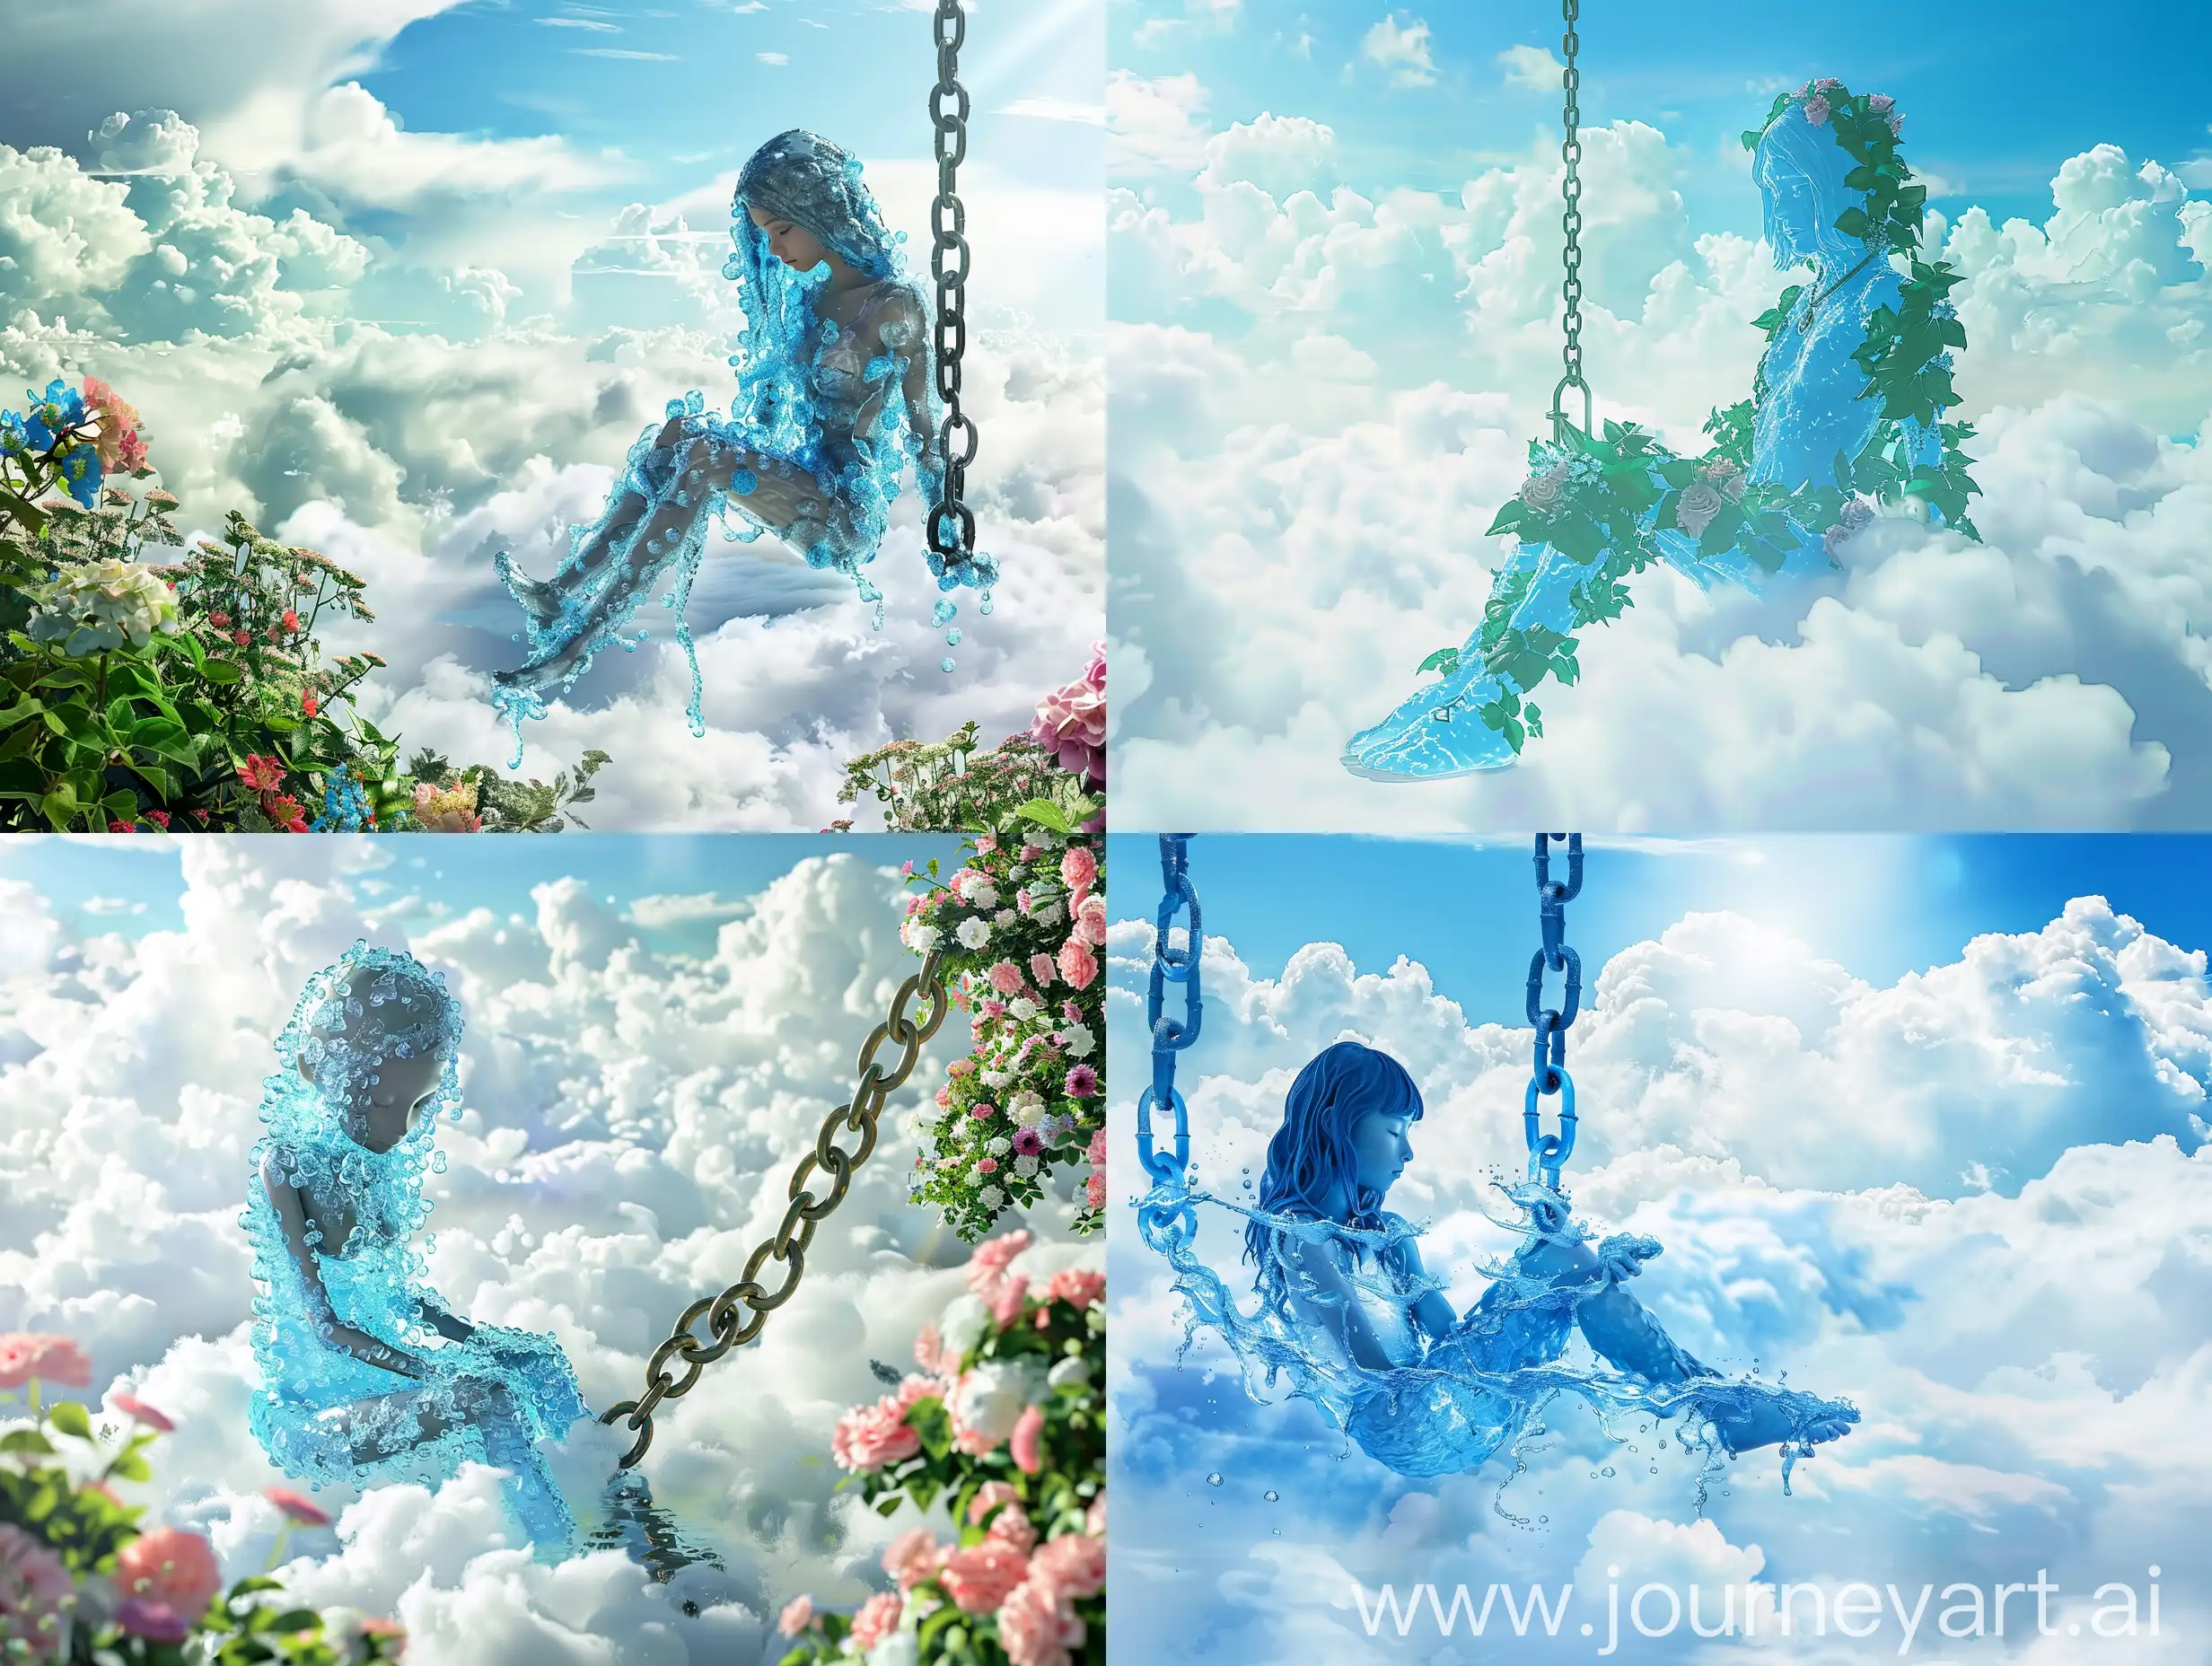 A girl made of water sitting on a chain in a garden on the clouds